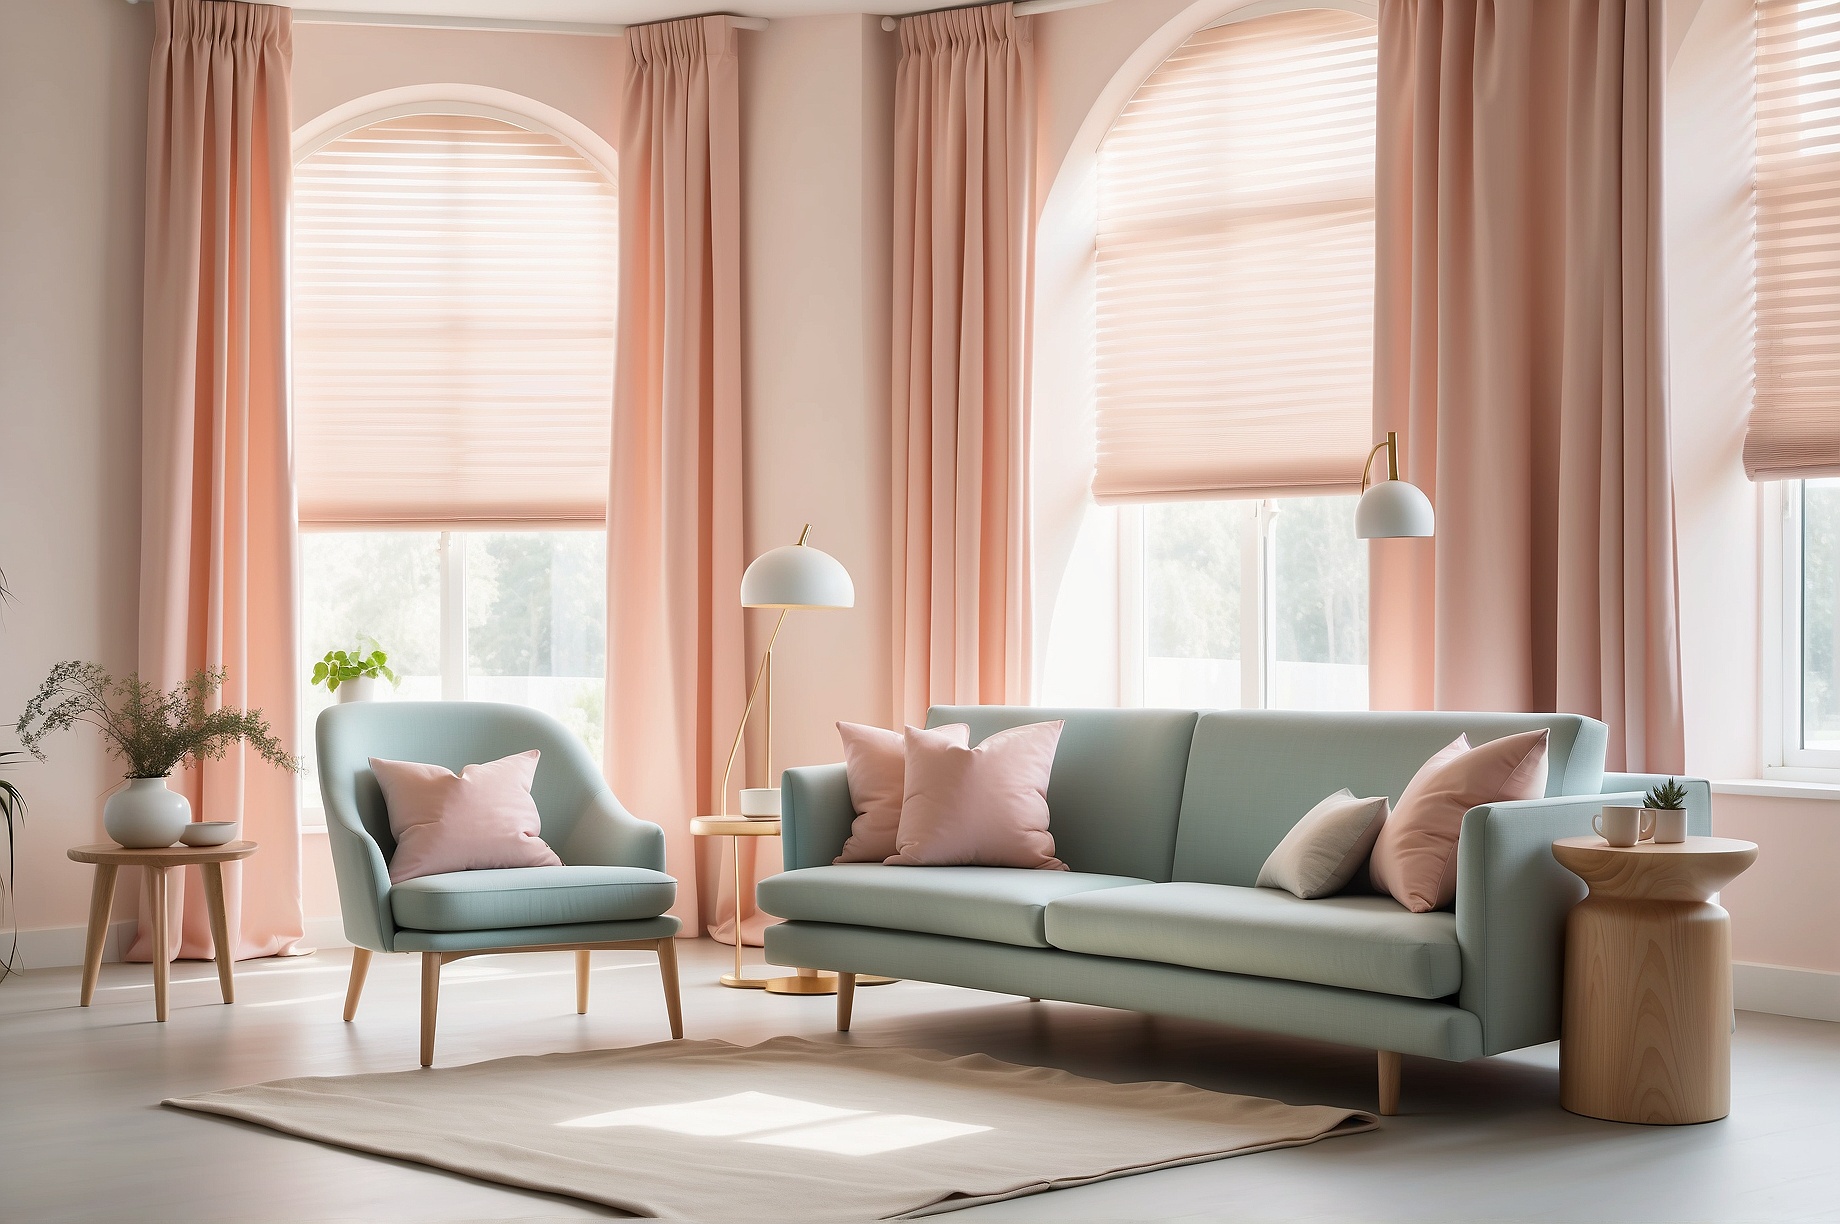 Using Roller Blinds or Roman Shades in a Danish Pastel Room